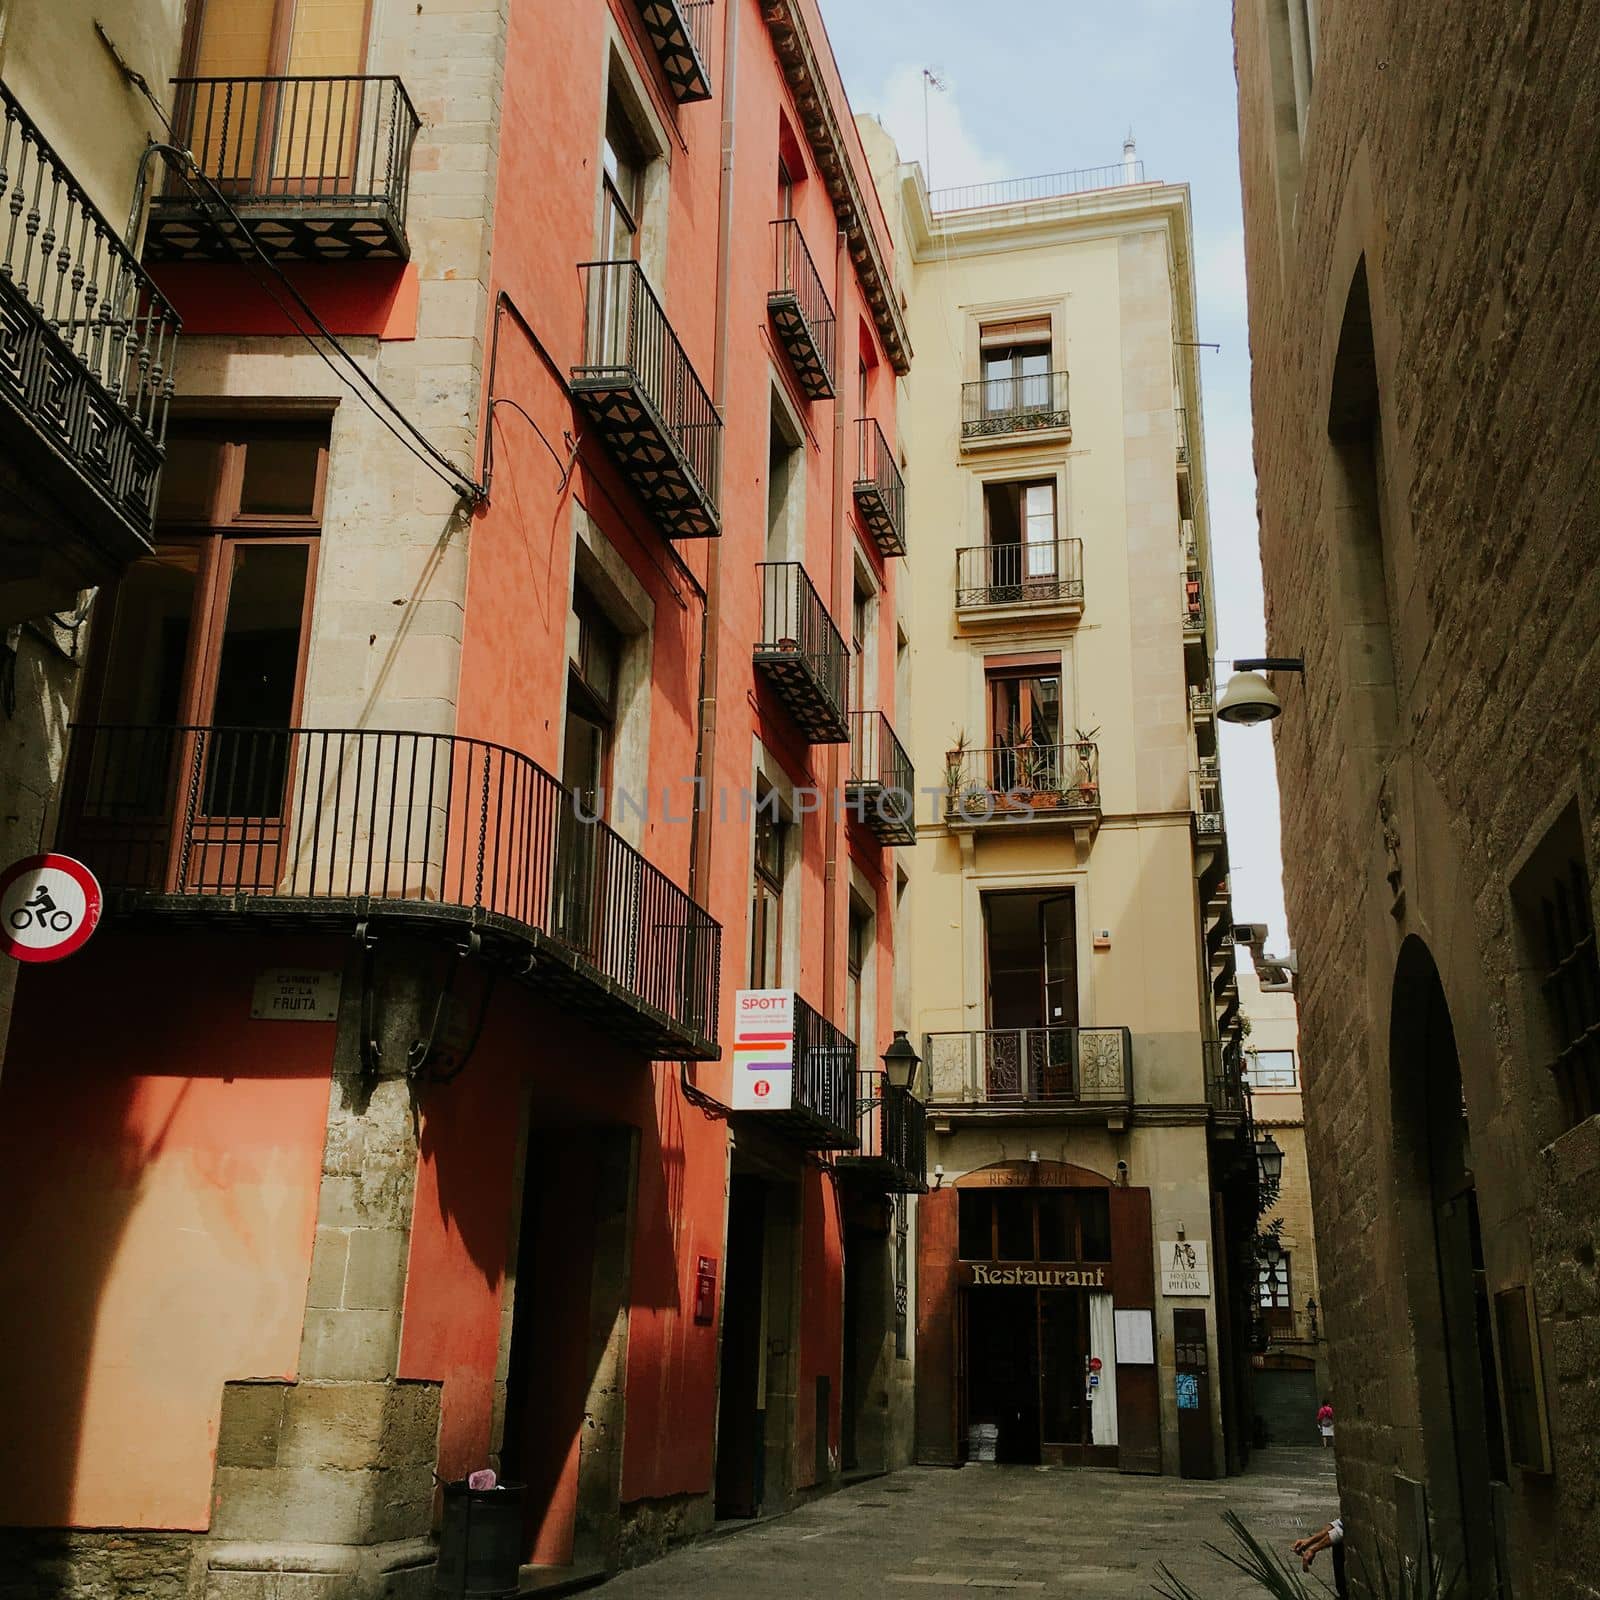 City street architecture in barcelona spain in summer by WeWander